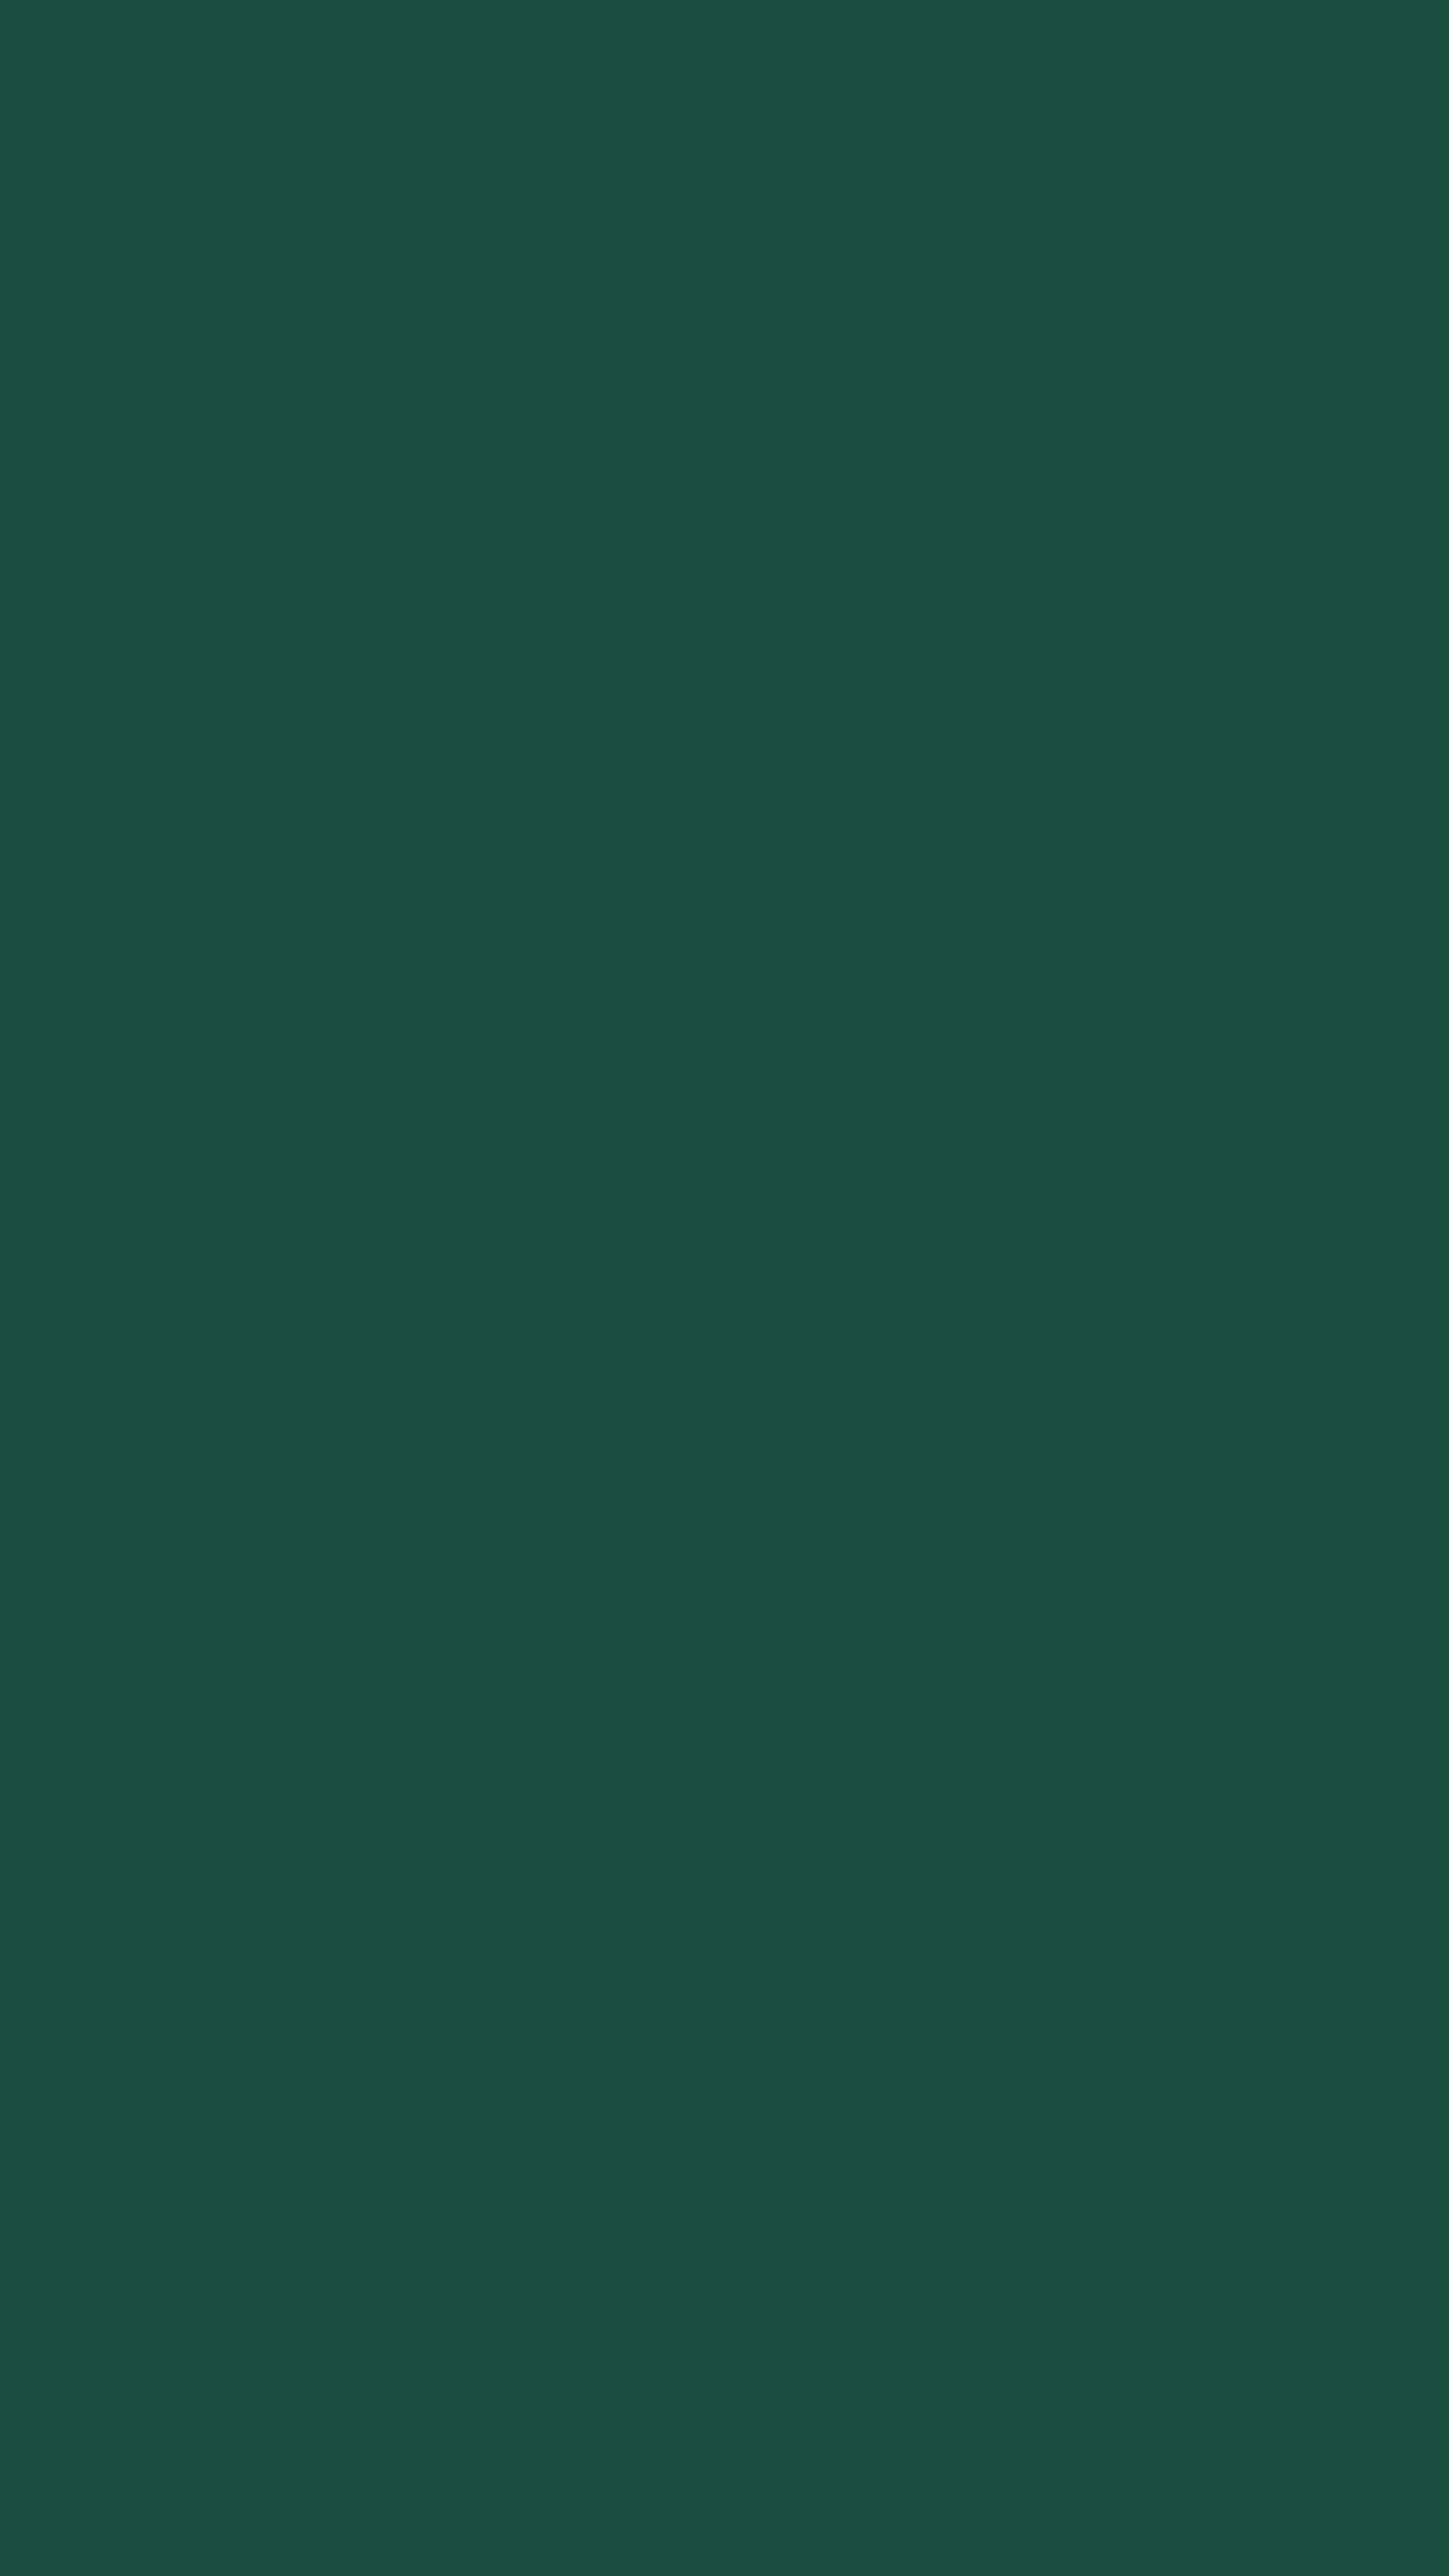 2160x3840 English Green Solid Color Background Wallpaper for Mobile Phone